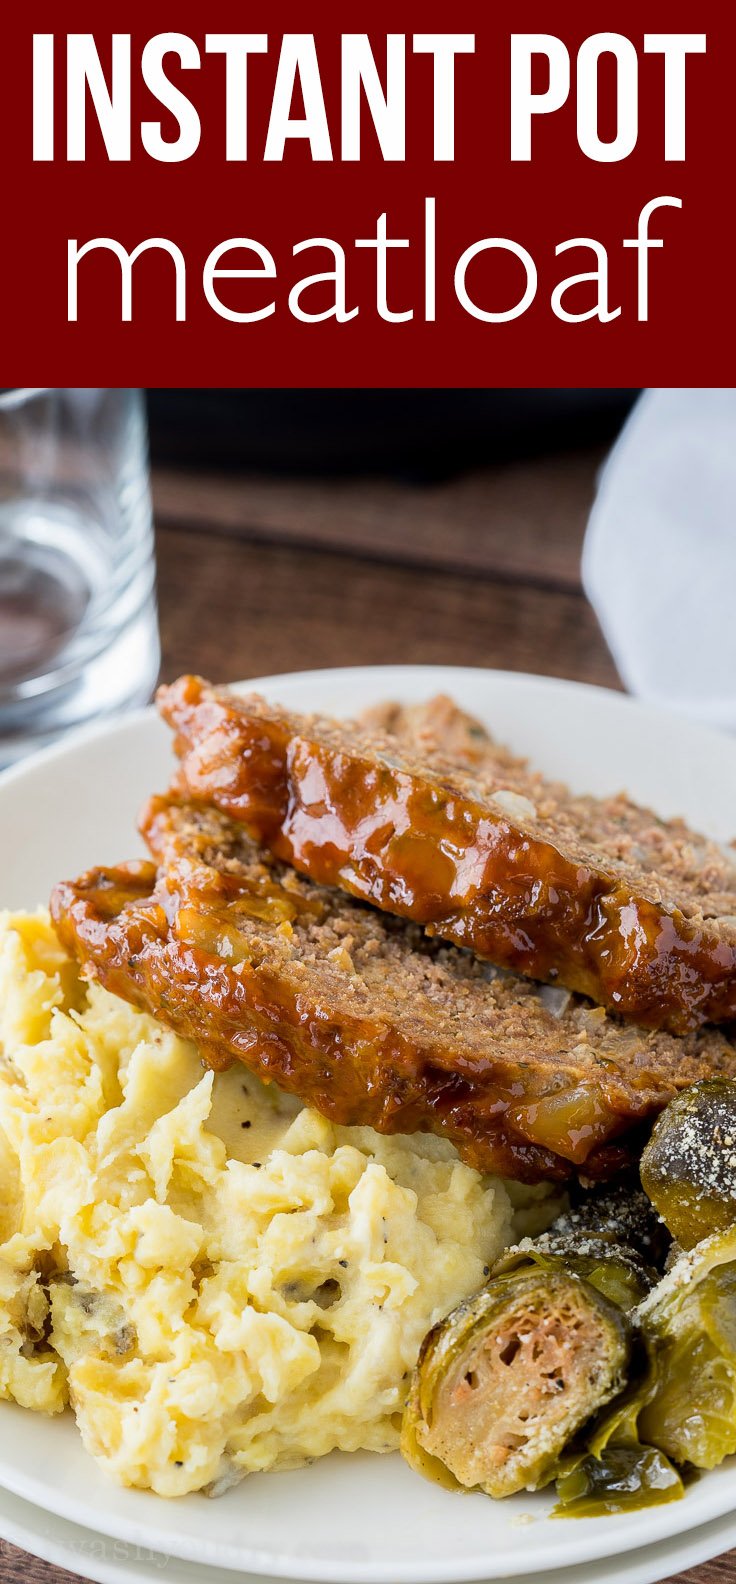 Super EASY Instant Pot Meatloaf Mashed Potatoes is cooked in just 20 minutes!